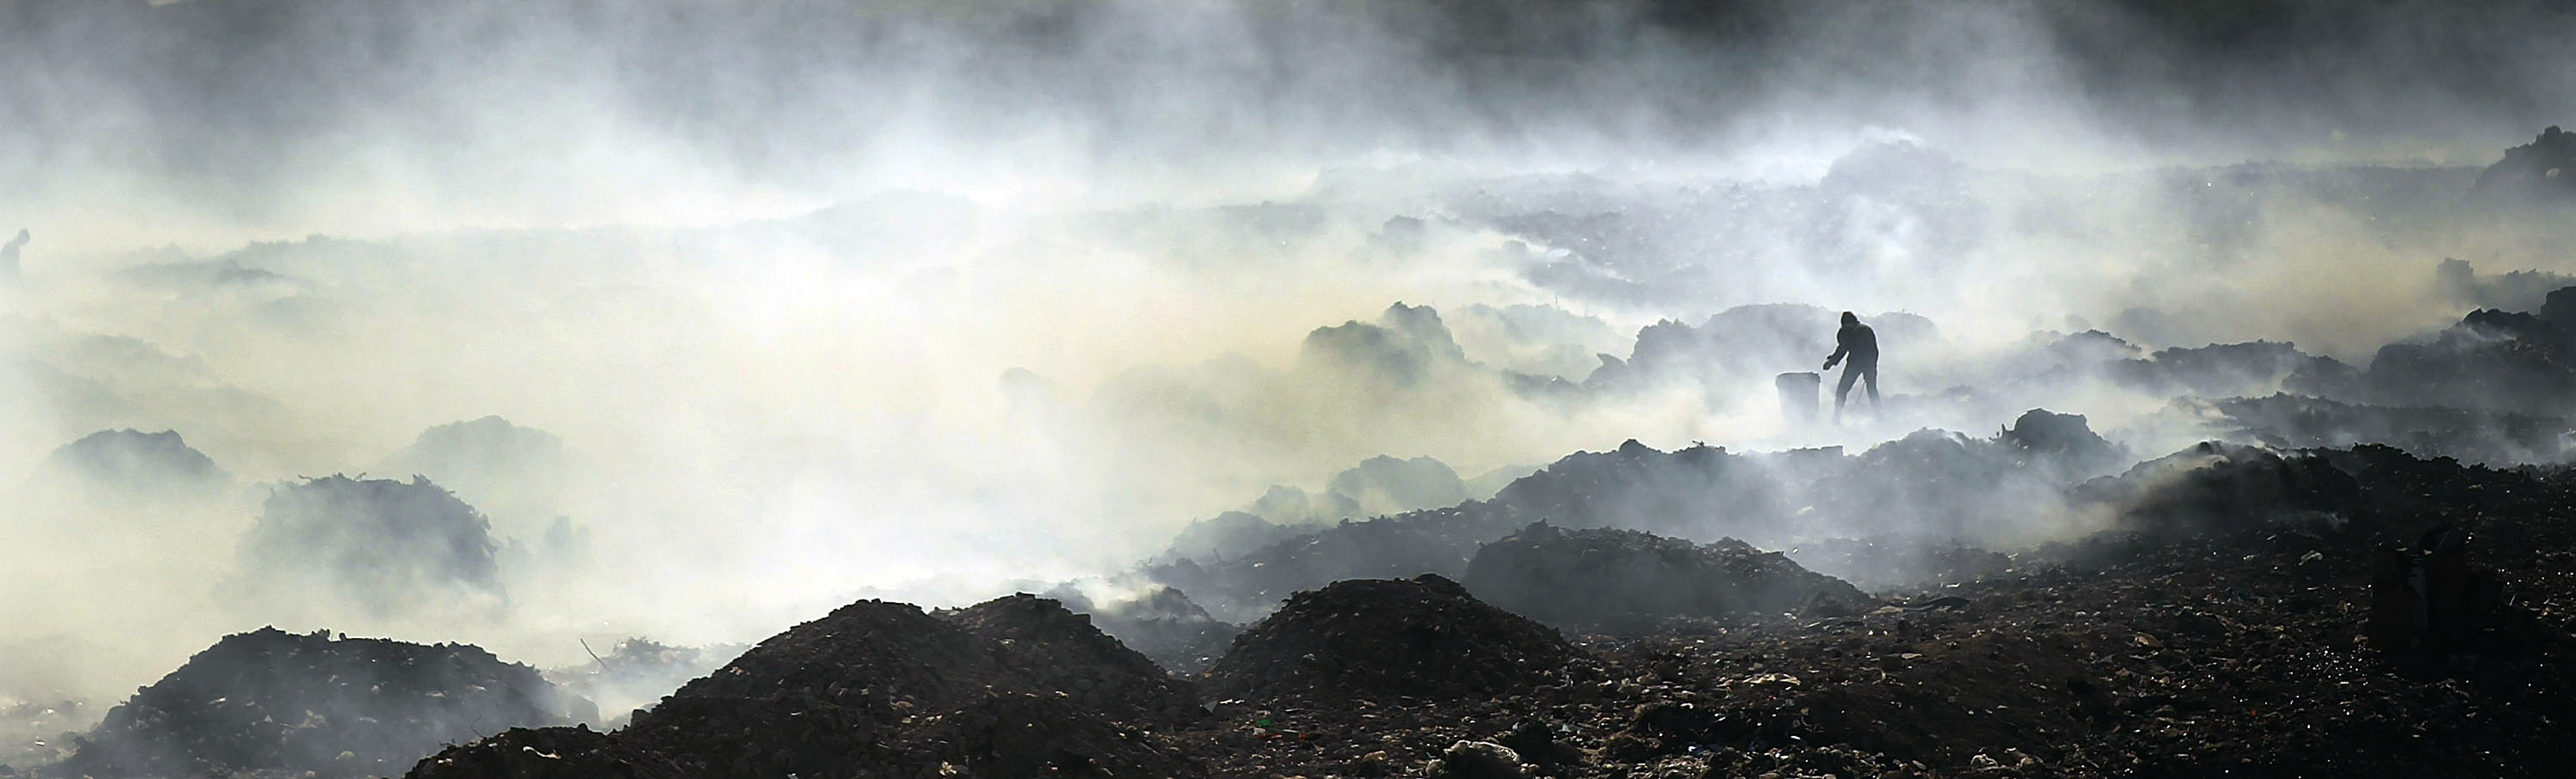 March 7, 2012. A lone man scavenges for recyclable and other usable items at the Trutier dump on the outskirts of Port-au-Prince, Haiti.